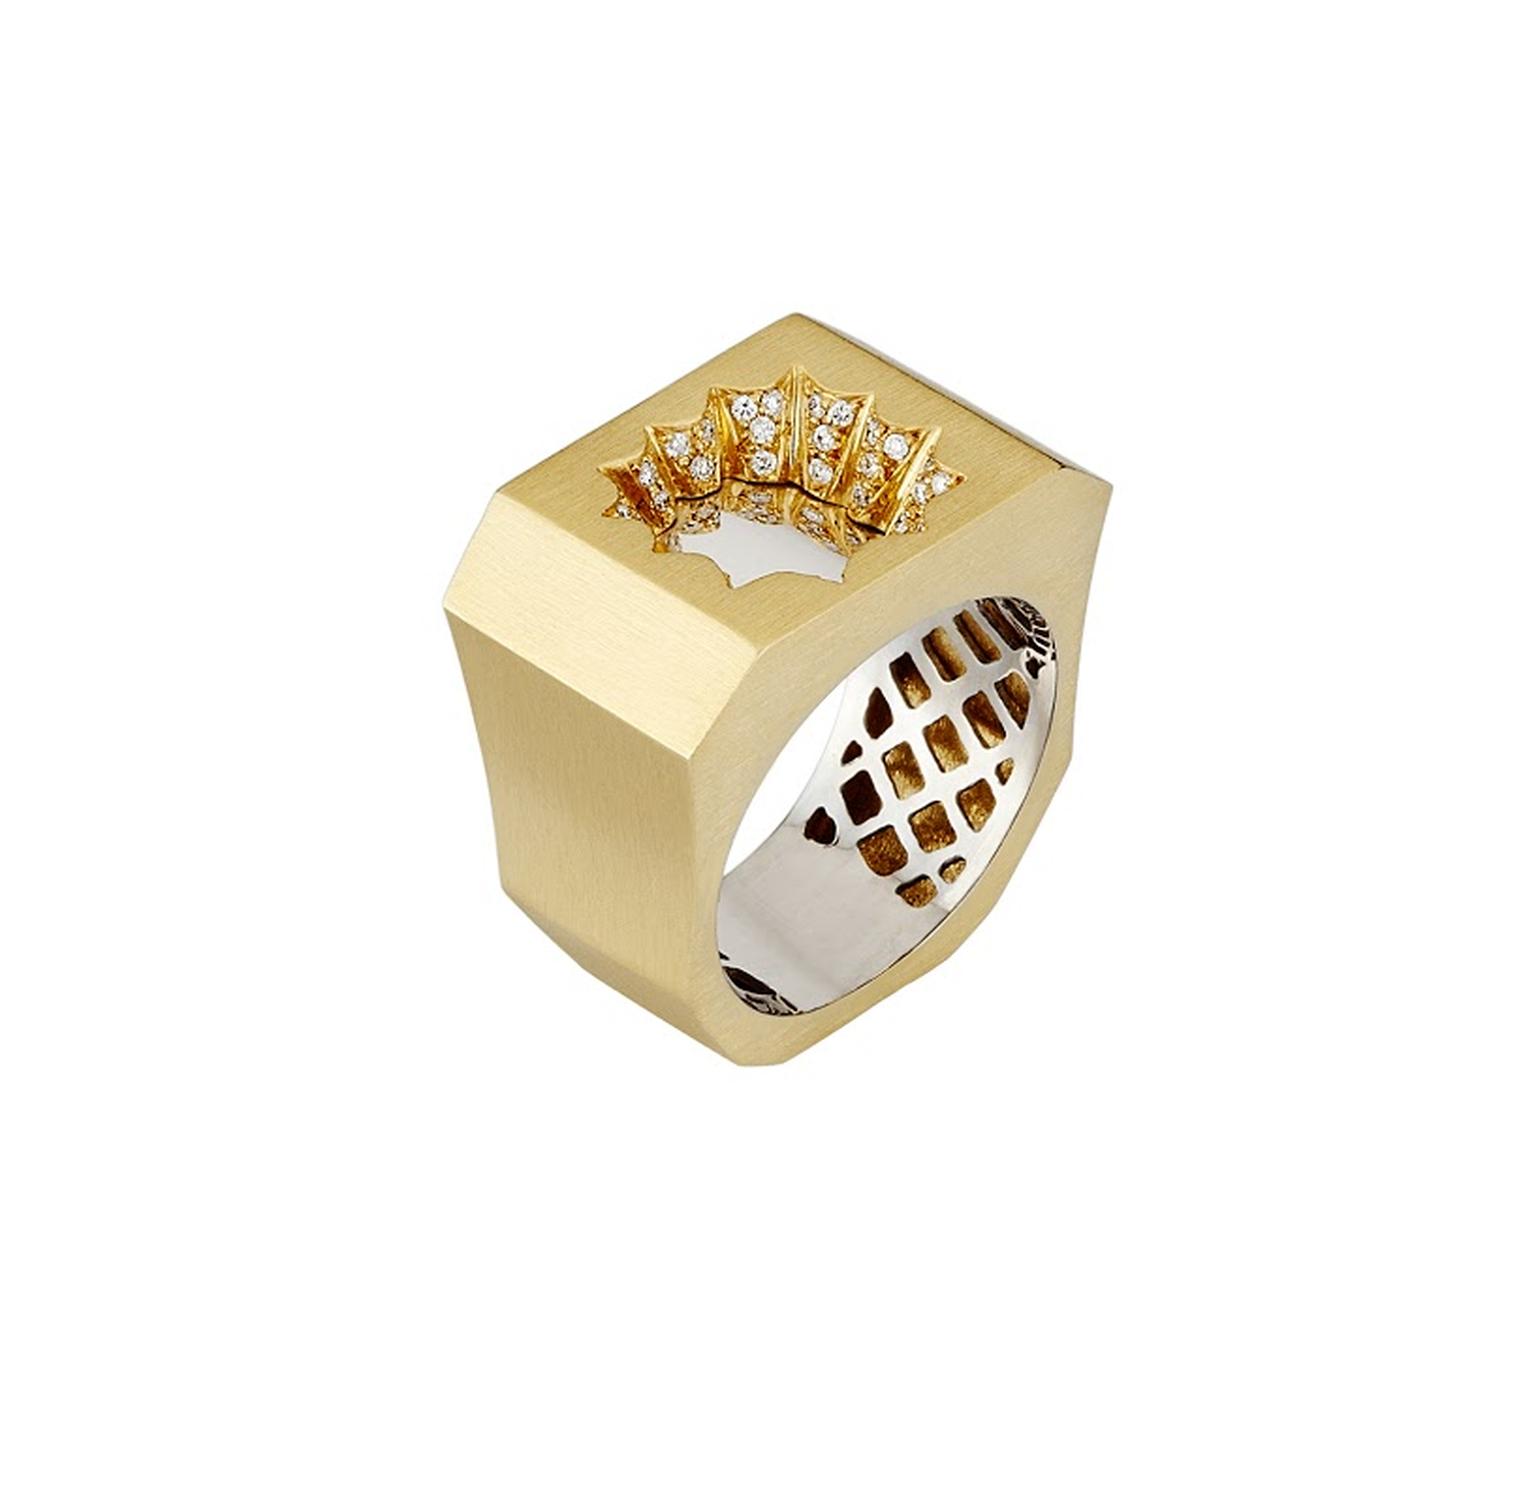 Mimata Geo ring in yellow and white gold with diamonds, from the Stars collection.